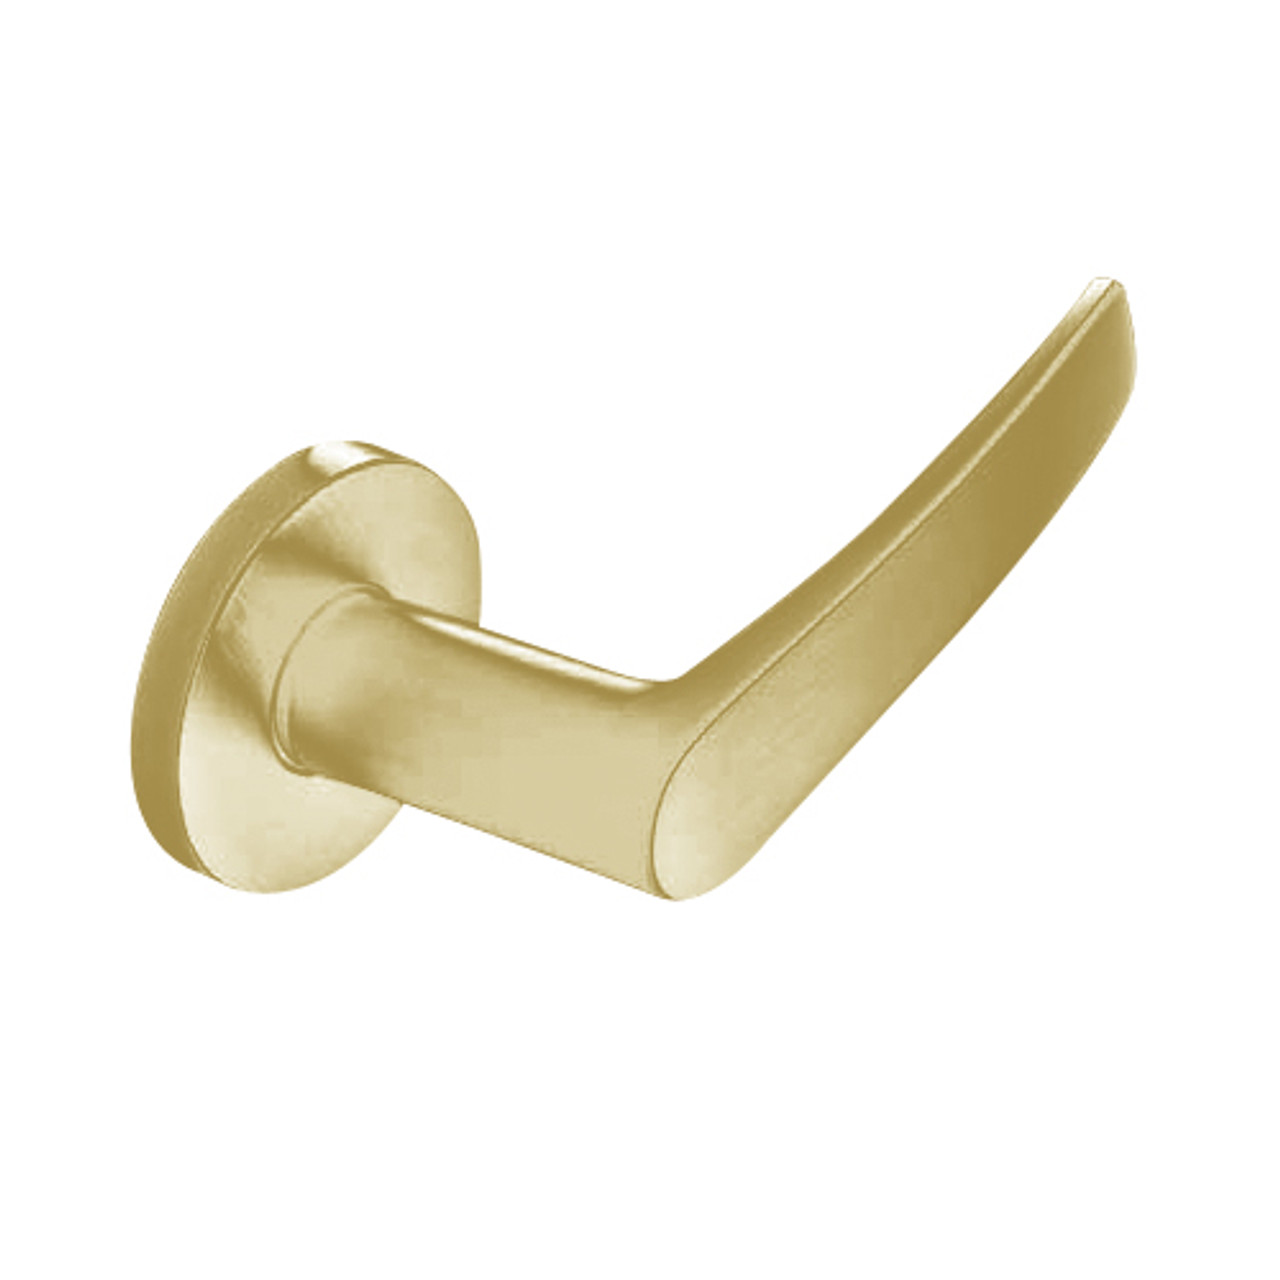 ML2010-ASB-606 Corbin Russwin ML2000 Series Mortise Passage Locksets with Armstrong Lever in Satin Brass